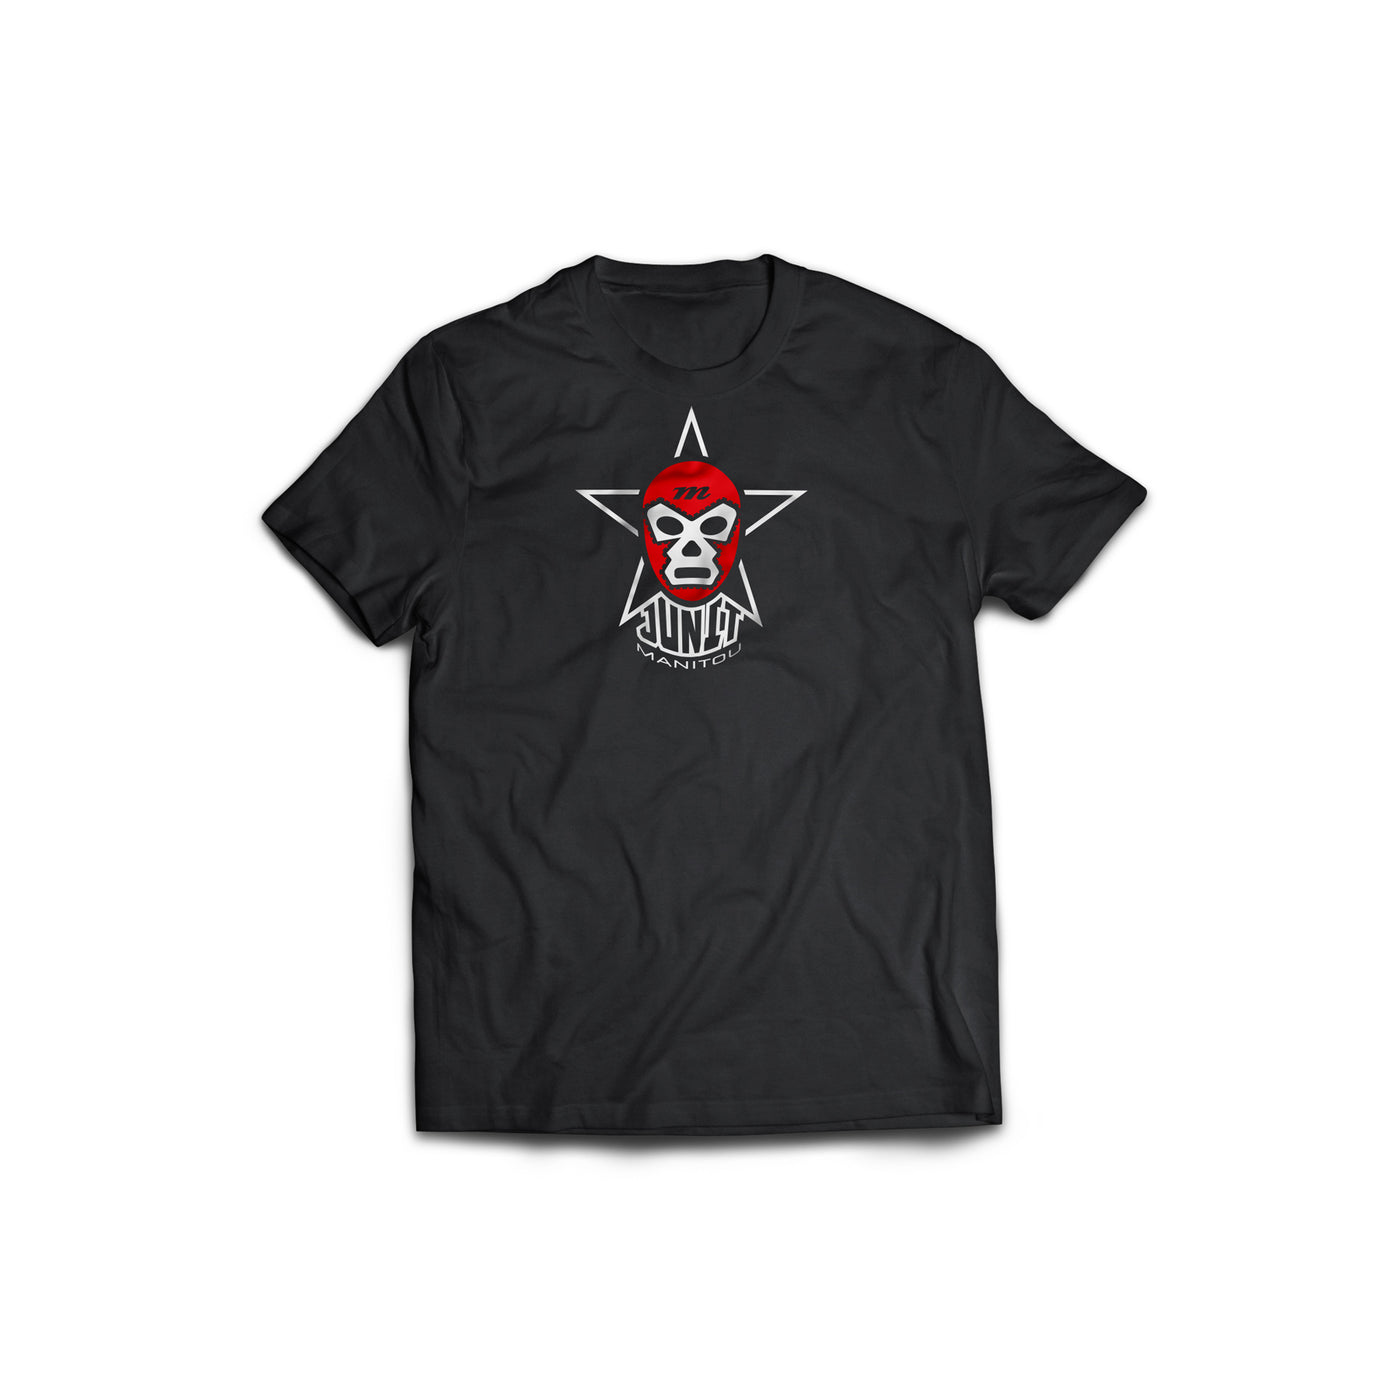 Manitou | Manitou JUNIT Circus Youth T-Shirt - Youth Small / Black